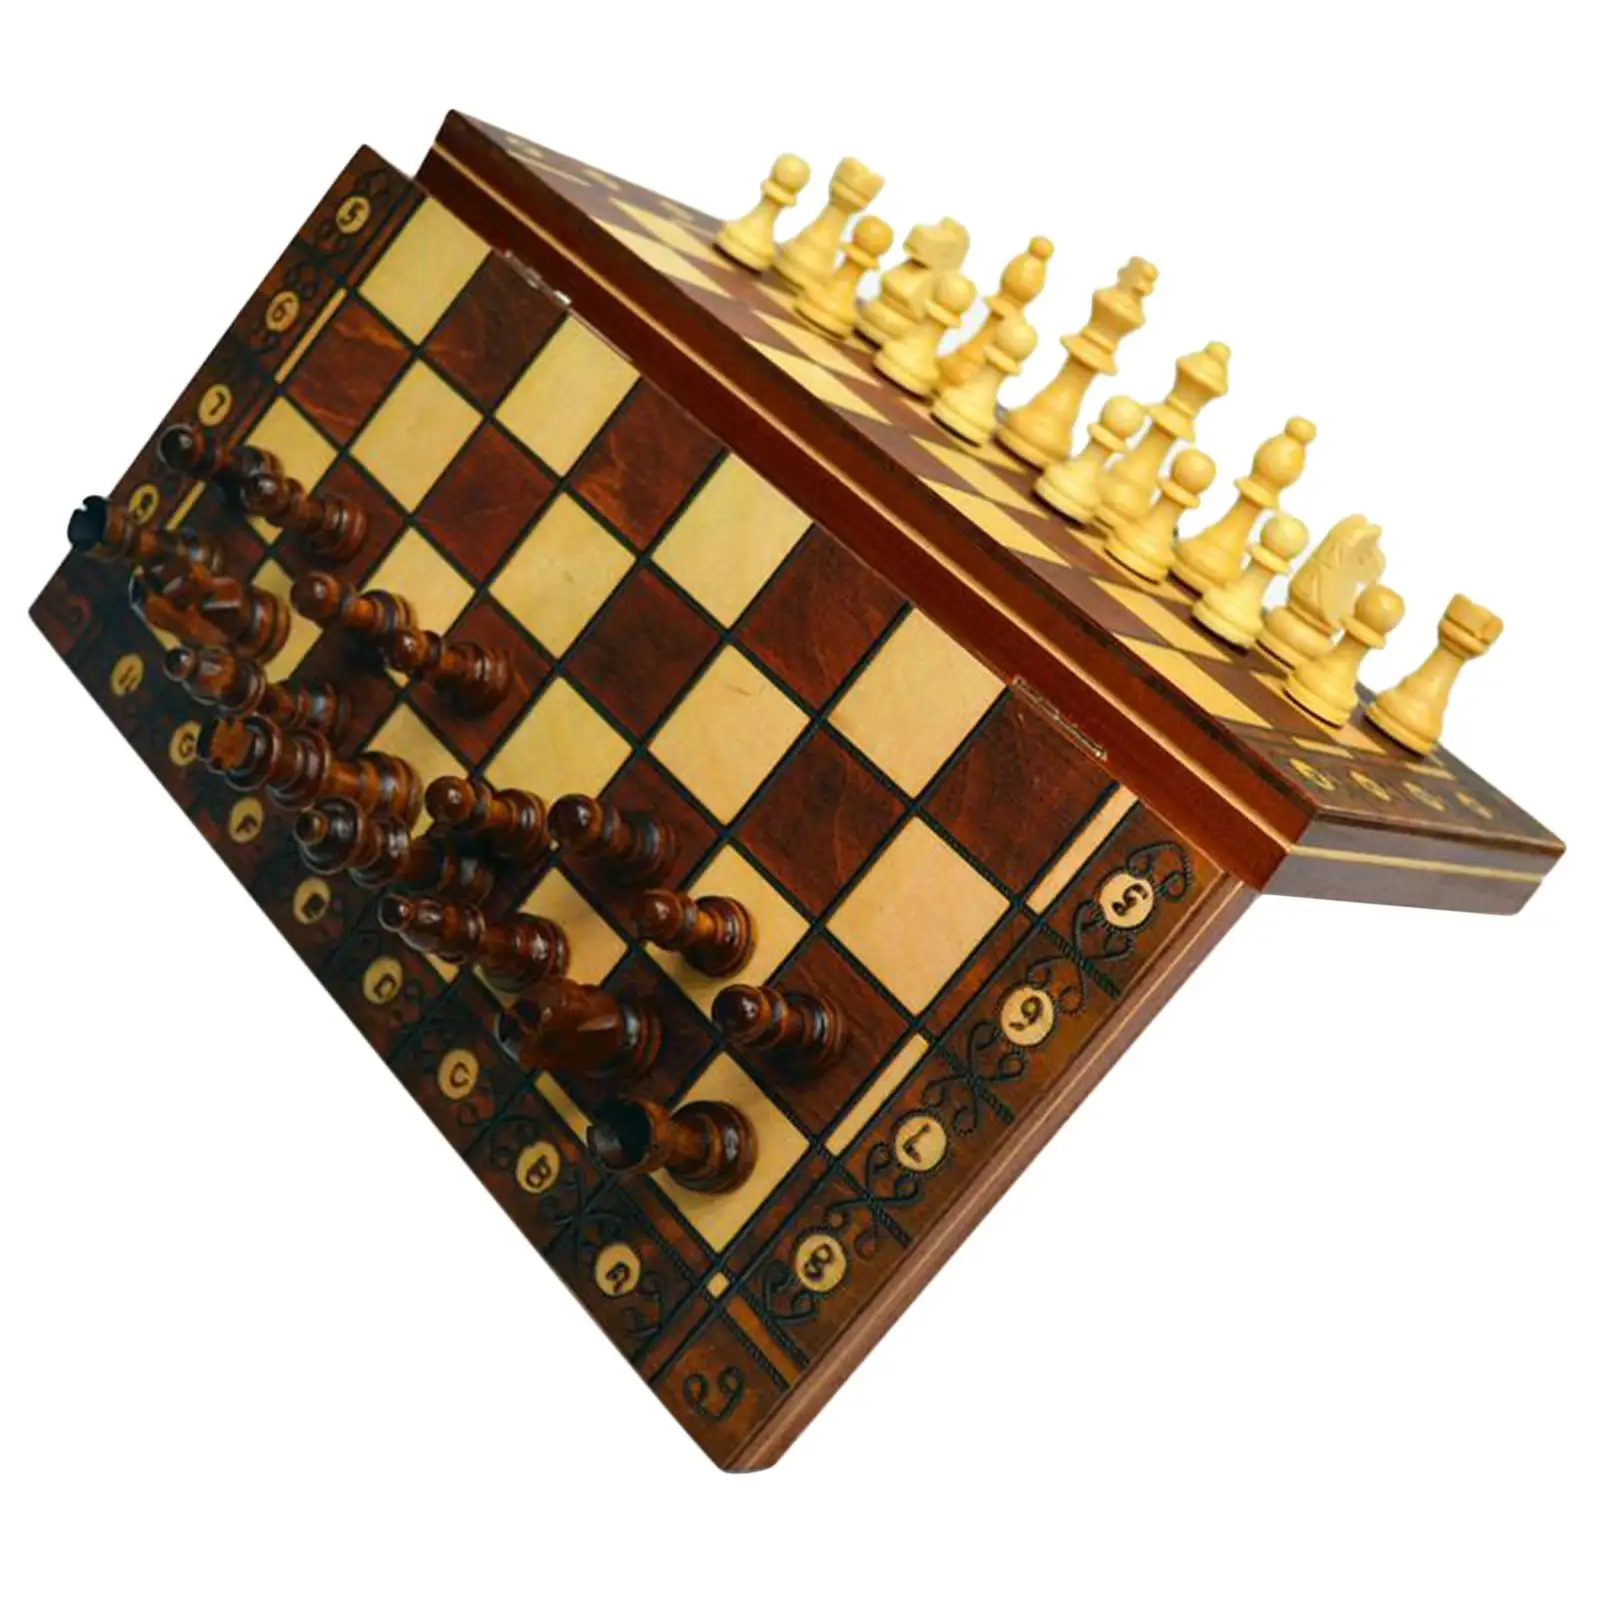 3 in 1 Chess Set Chess Checkers Backgammon Folding Wooden Chess Board 17x17inch